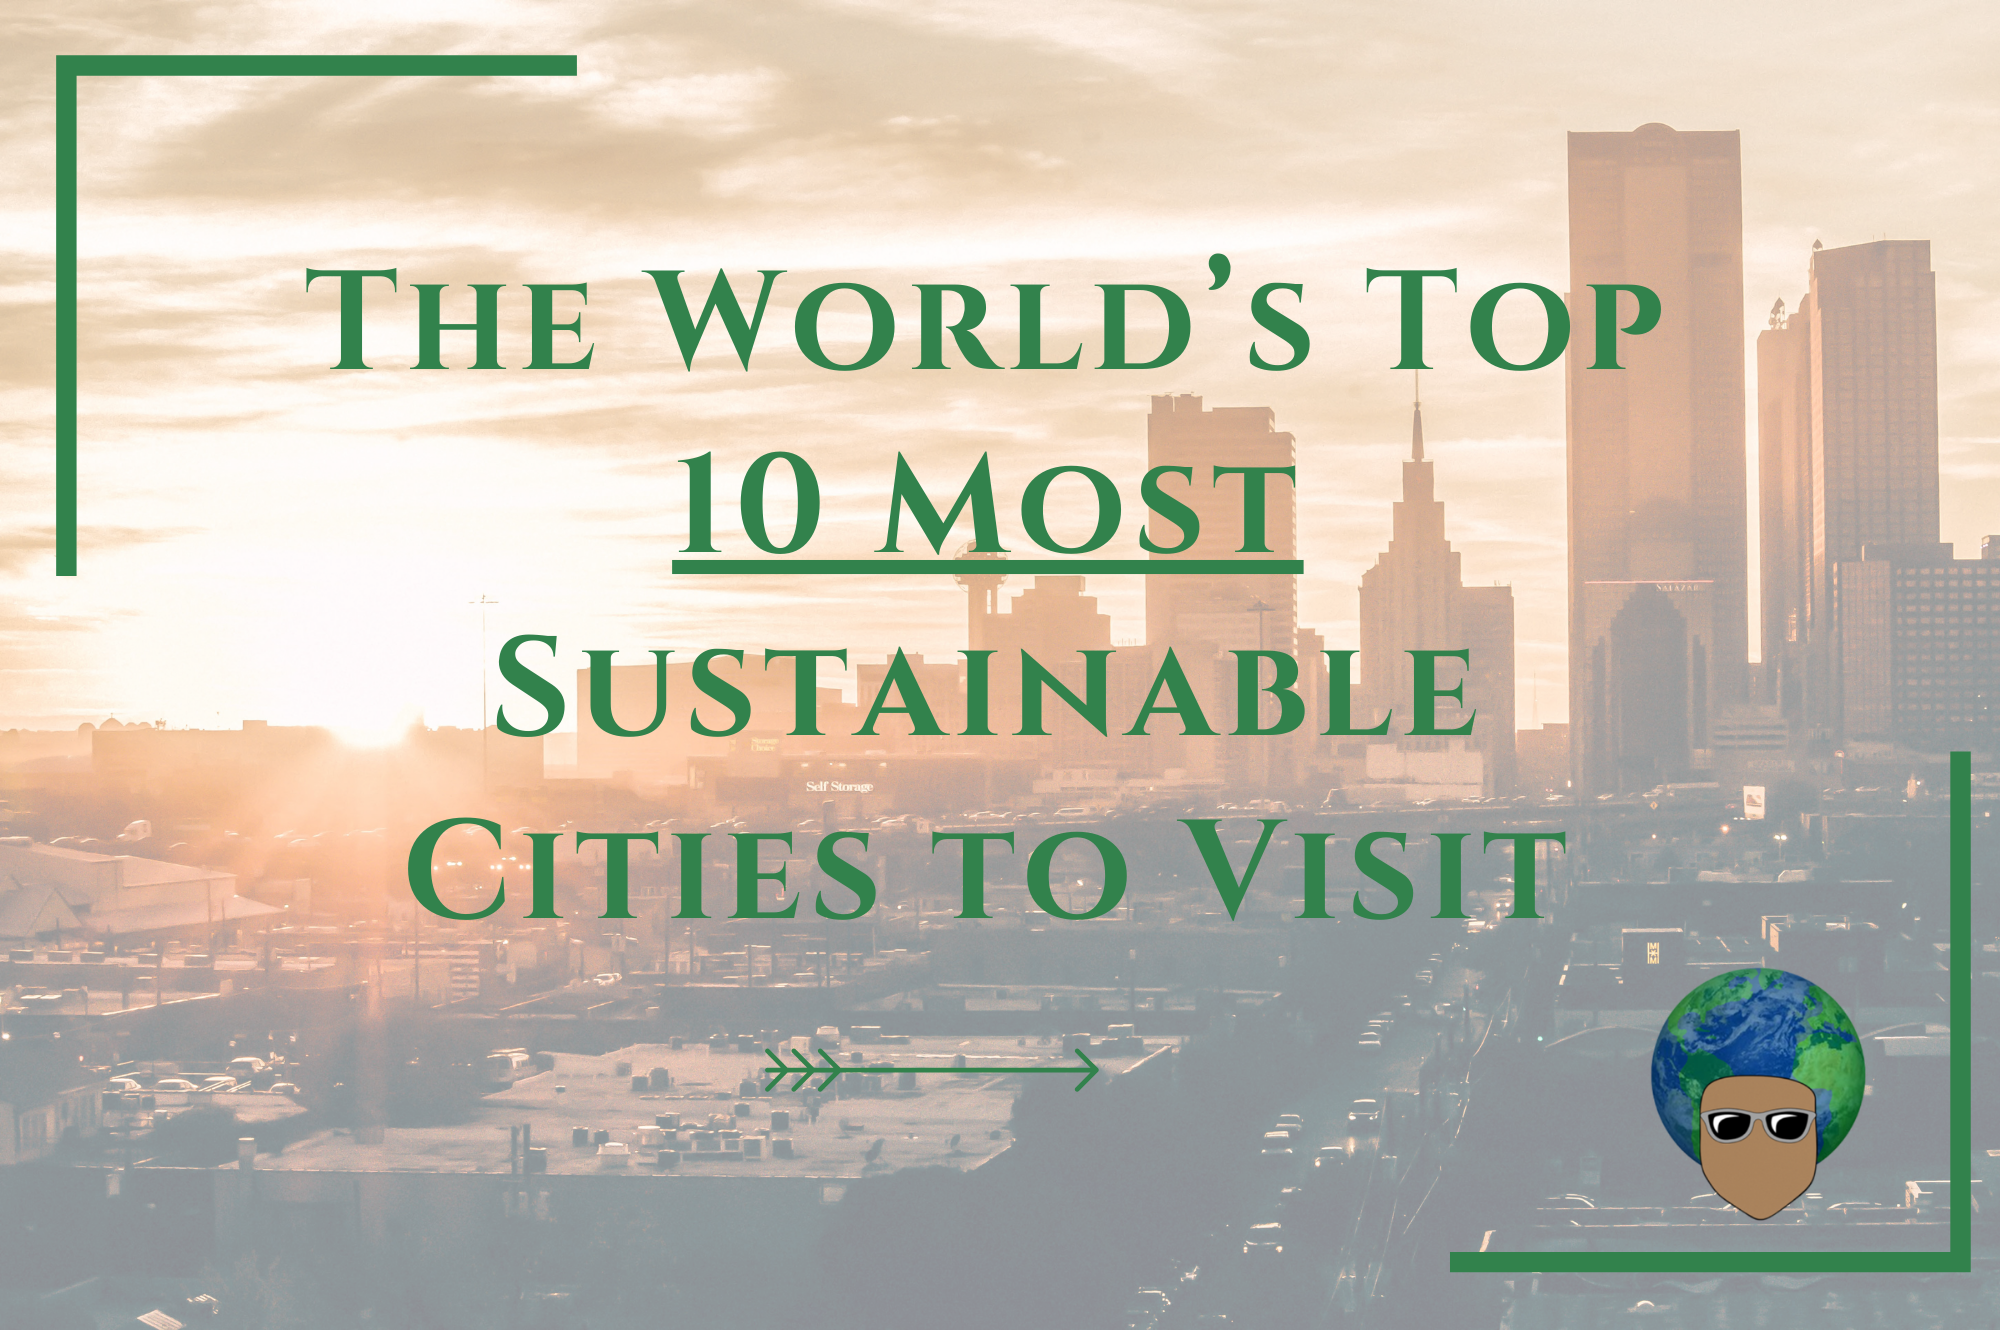 You are currently viewing The World’s Top 10 Most Sustainable Cities to Visit